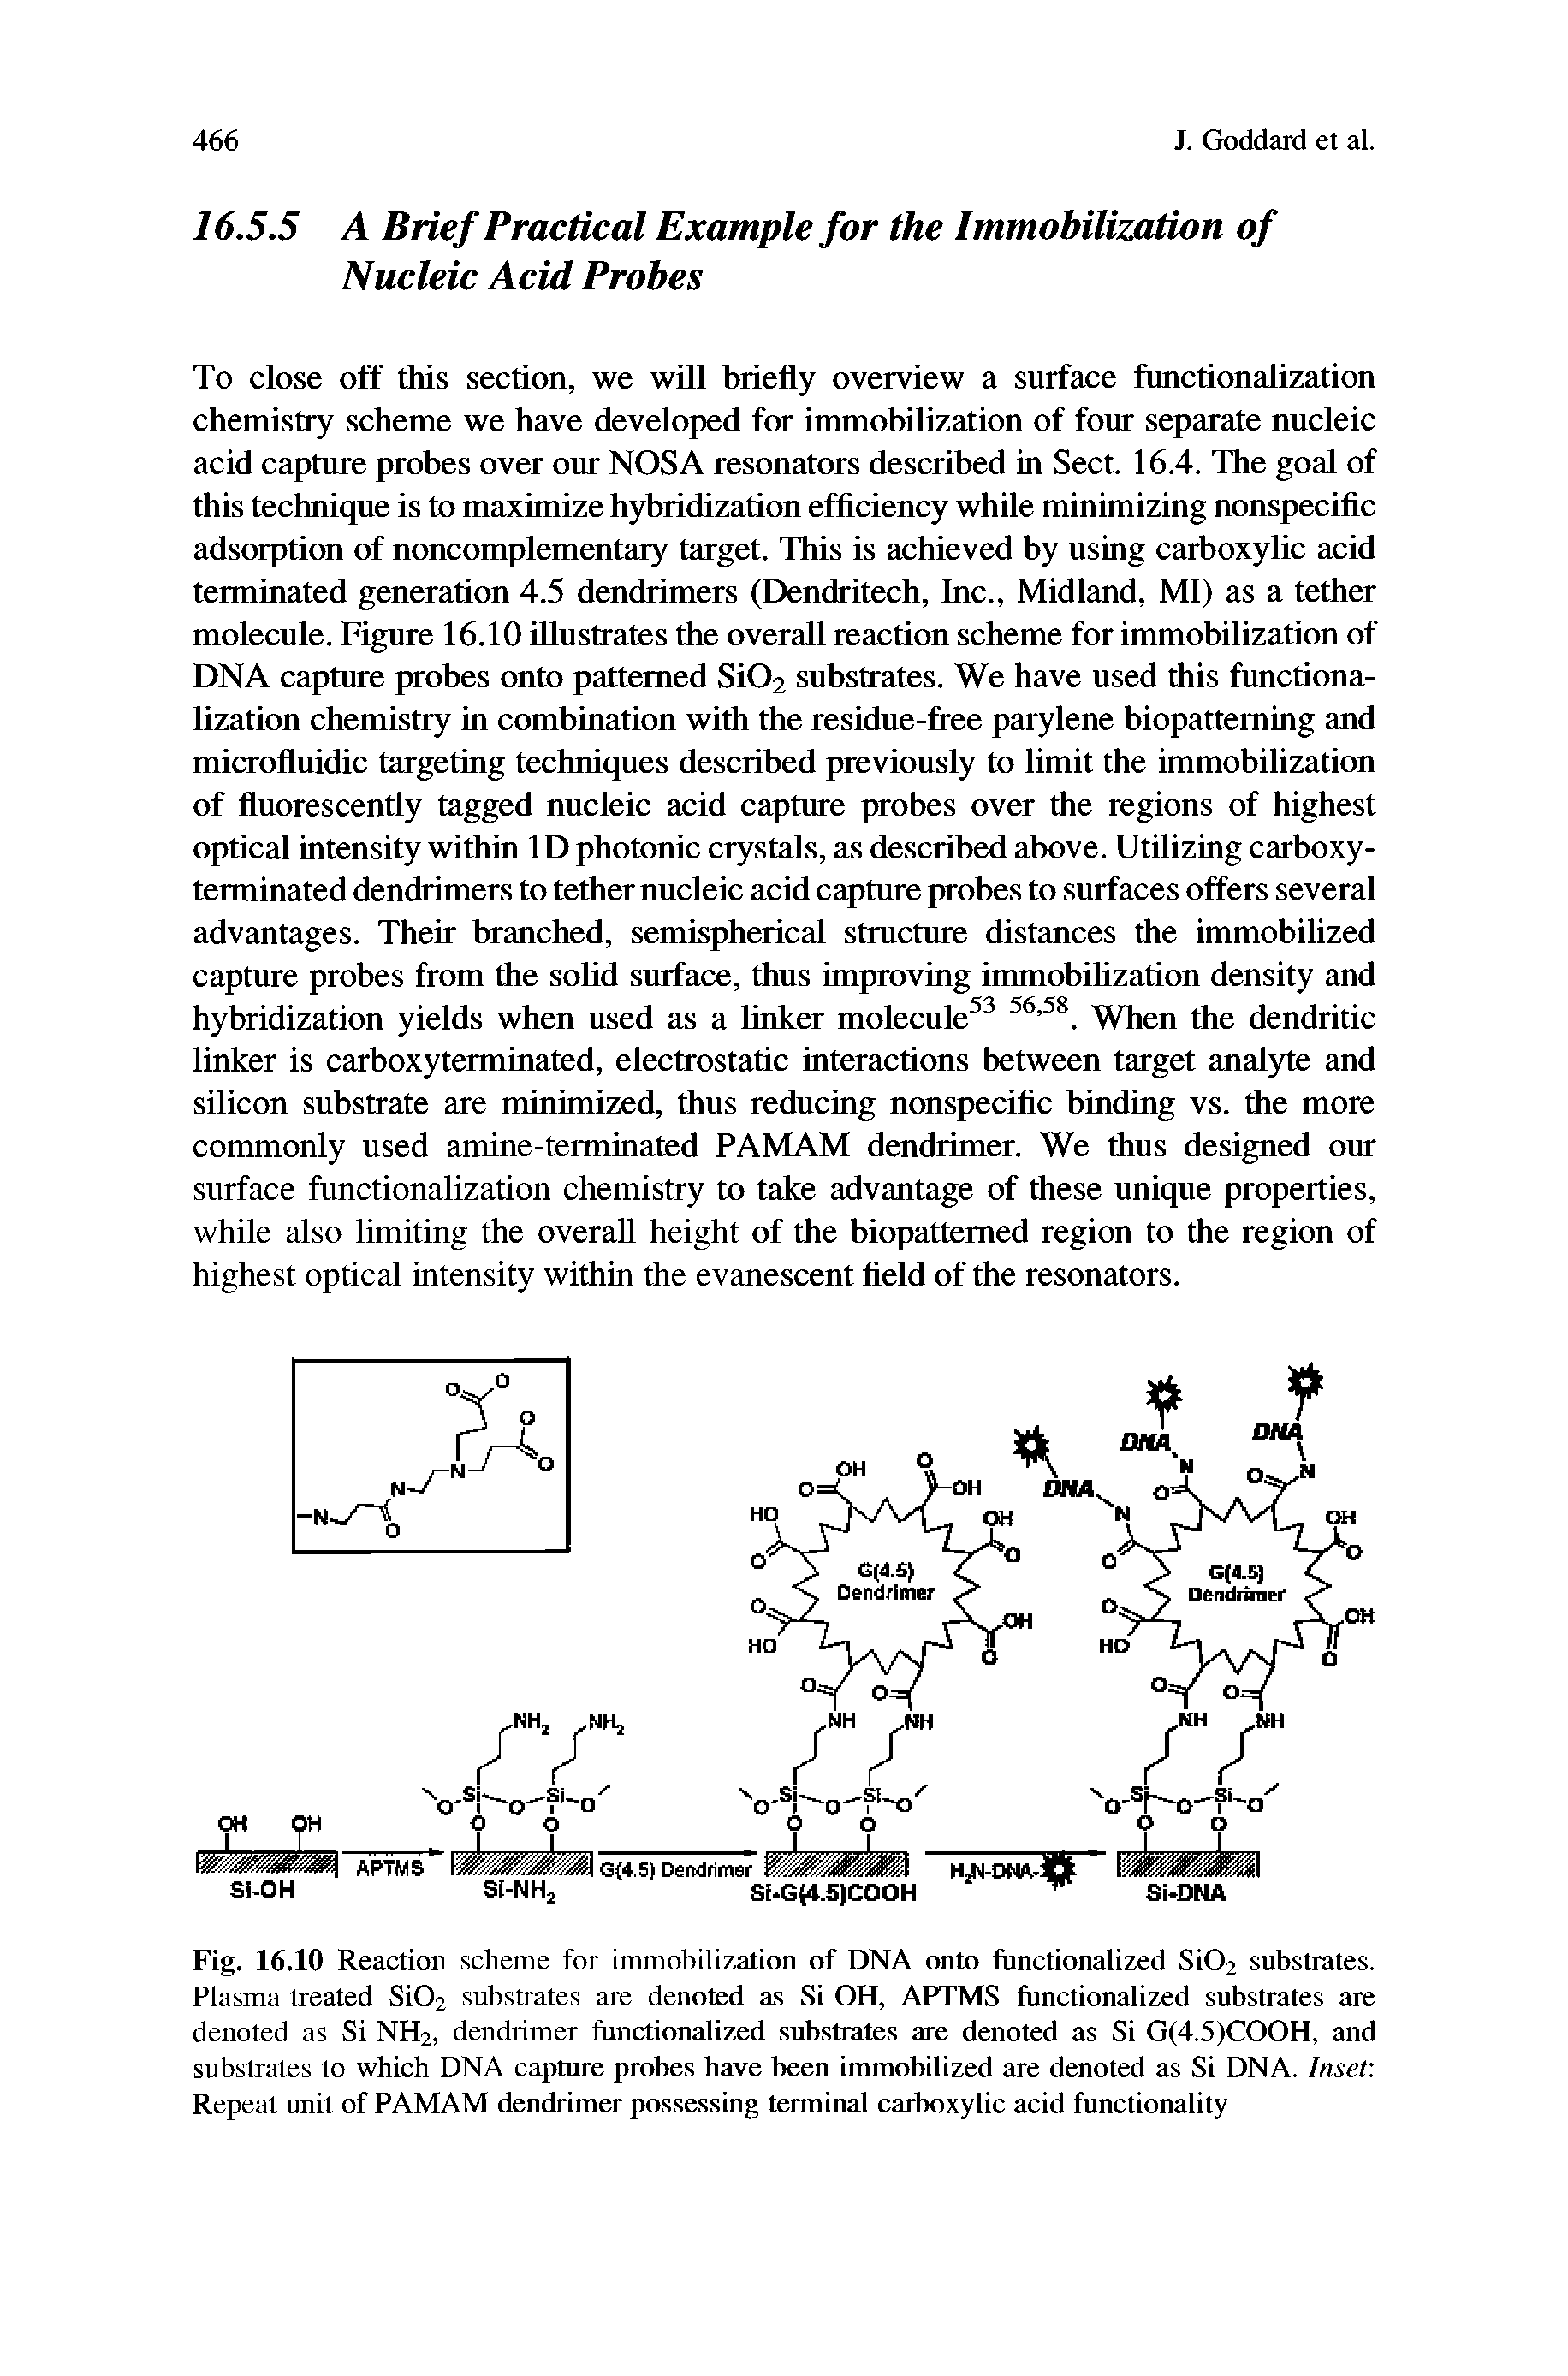 Fig. 16.10 Reaction scheme for immobilization of DNA onto functionalized Si02 substrates. Plasma treated Si02 substrates are denoted as Si OH, APTMS functionalized substrates are denoted as Si NH2, dendrimer functionalized substrates are denoted as Si G(4.5)COOH, and substrates to which DNA capture probes have been immobilized are denoted as Si DNA. Inset Repeat unit of PAMAM dendrimer possessing terminal carboxylic acid functionality...